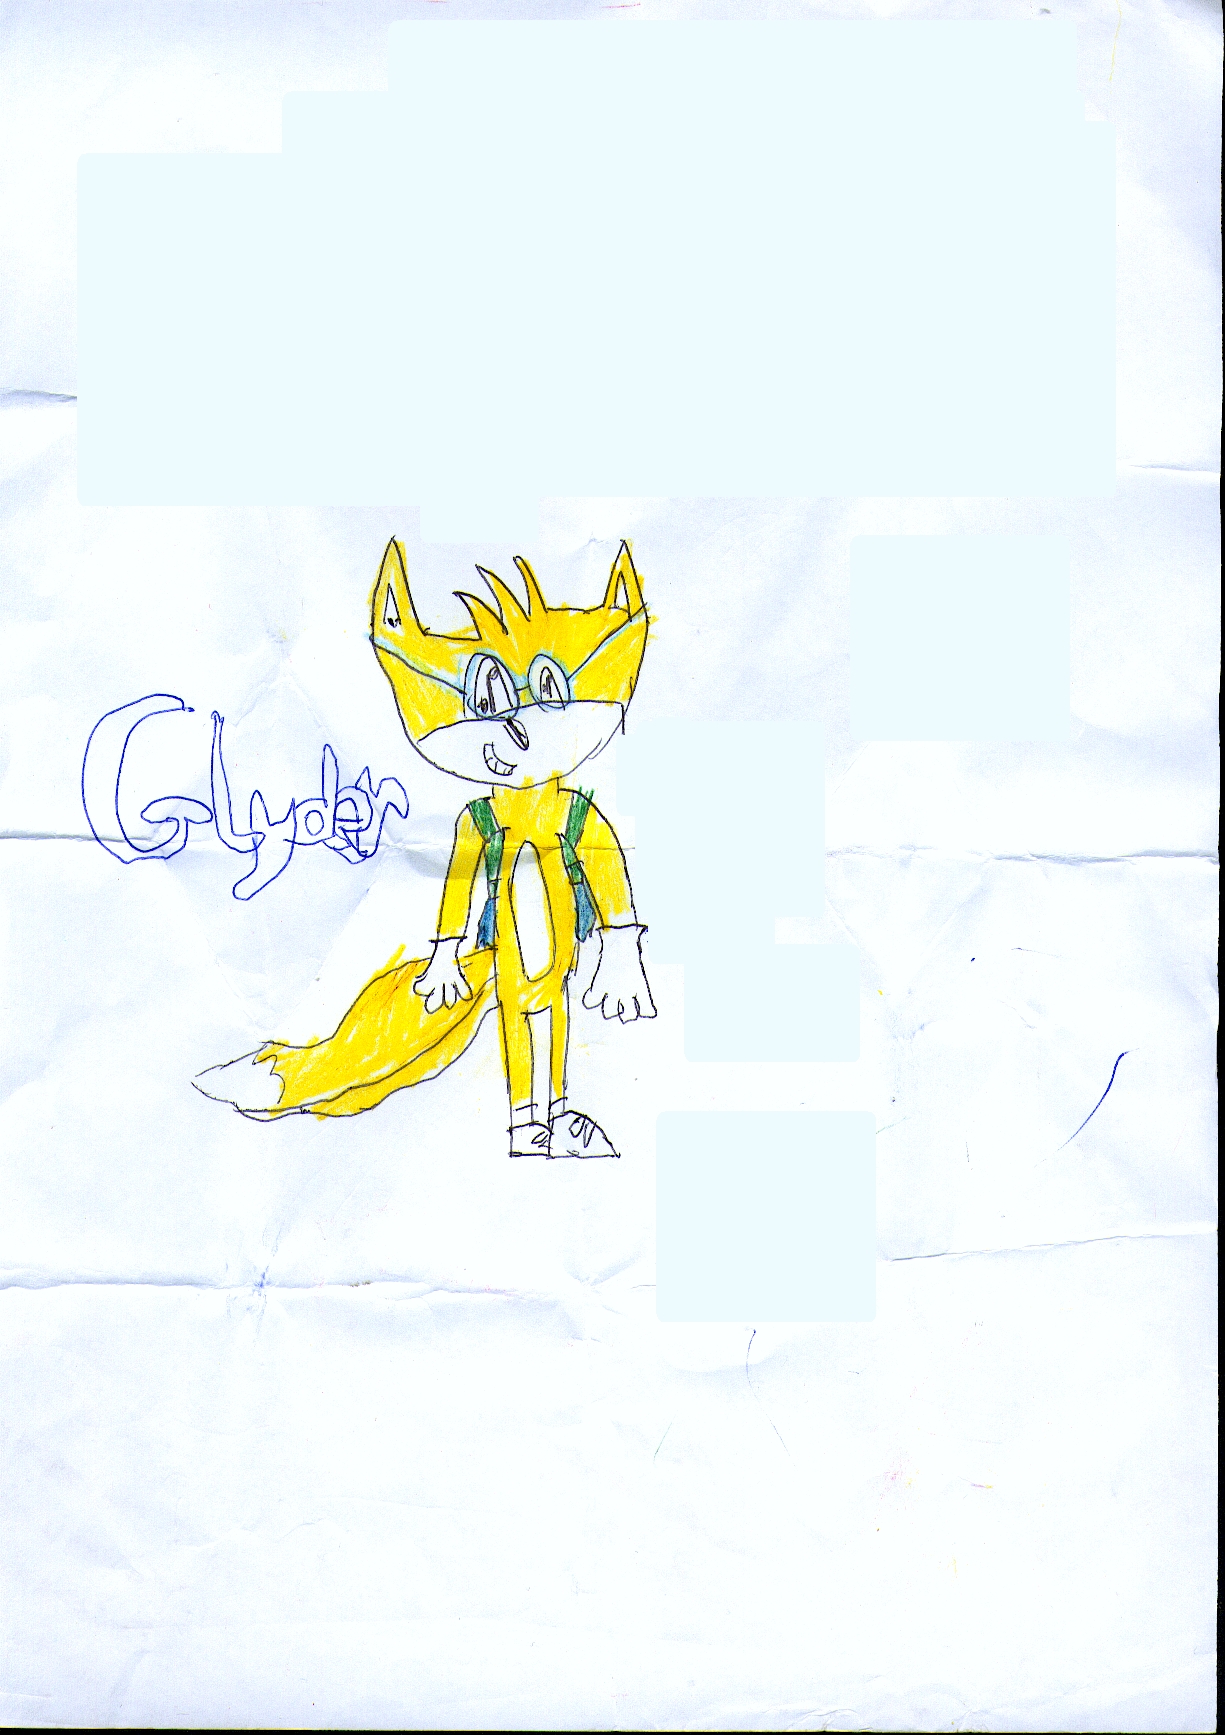 Glyder the Fox by animeloverOIO